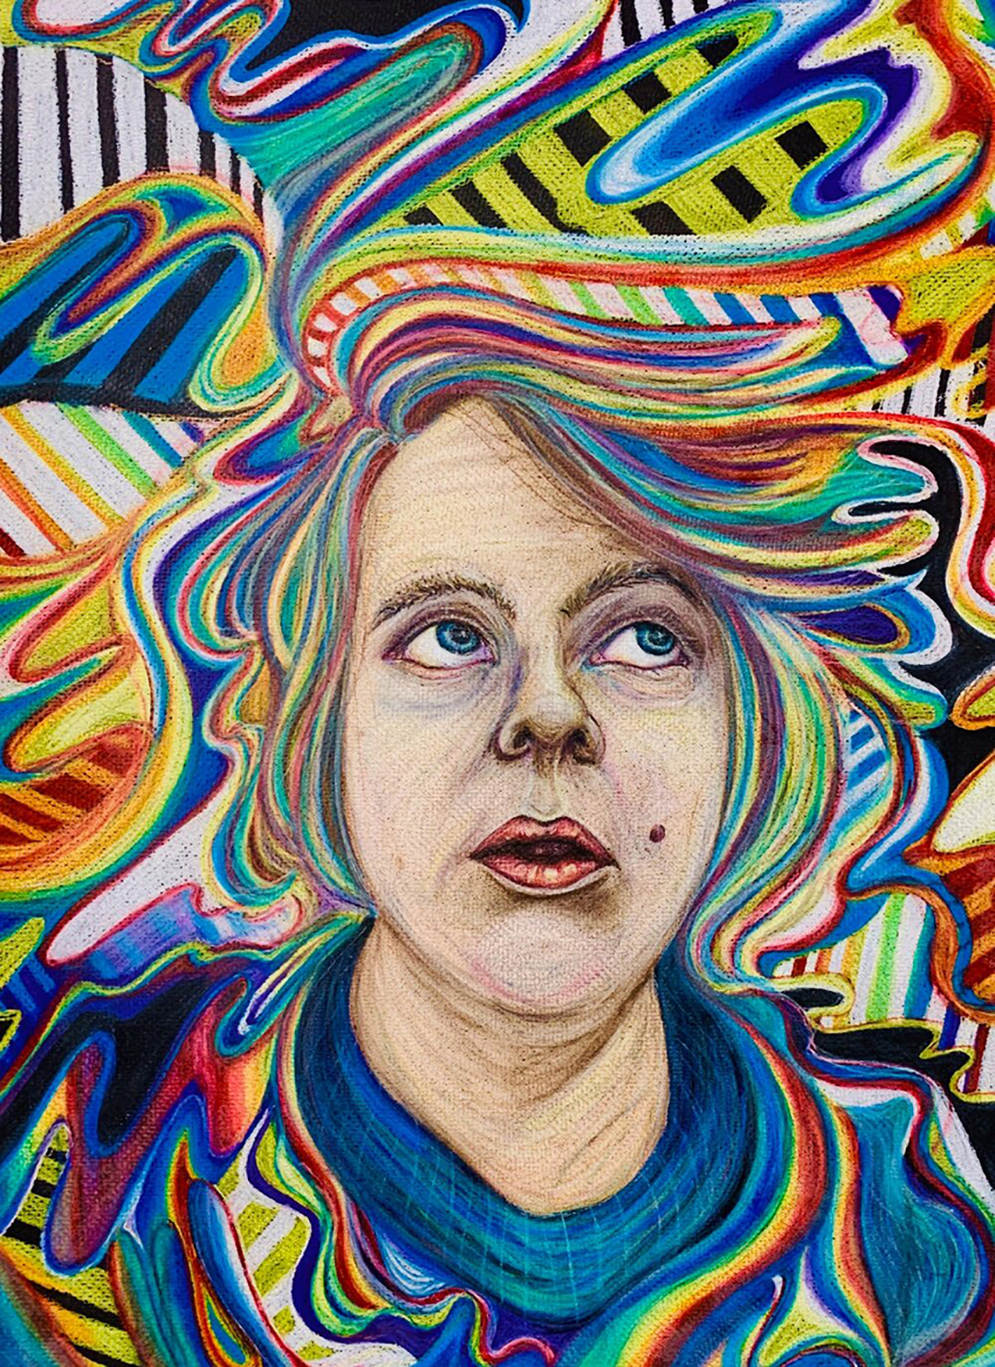 A self portrait of the artist. In the middle of the drawing is a white queer person who is looking upwards towards the right of the image at their hair. The person’s mouth is open and their face has hues of various colors. Their hair is multicolored in an assortment of red, orange, yellow, green, blue, purple, pink, brown, and black. The hair blends into the background of swirls, squiggly lines, stripes, and patterns of various colors. The shoulders and neck area of the artist are covered in more rainbow co